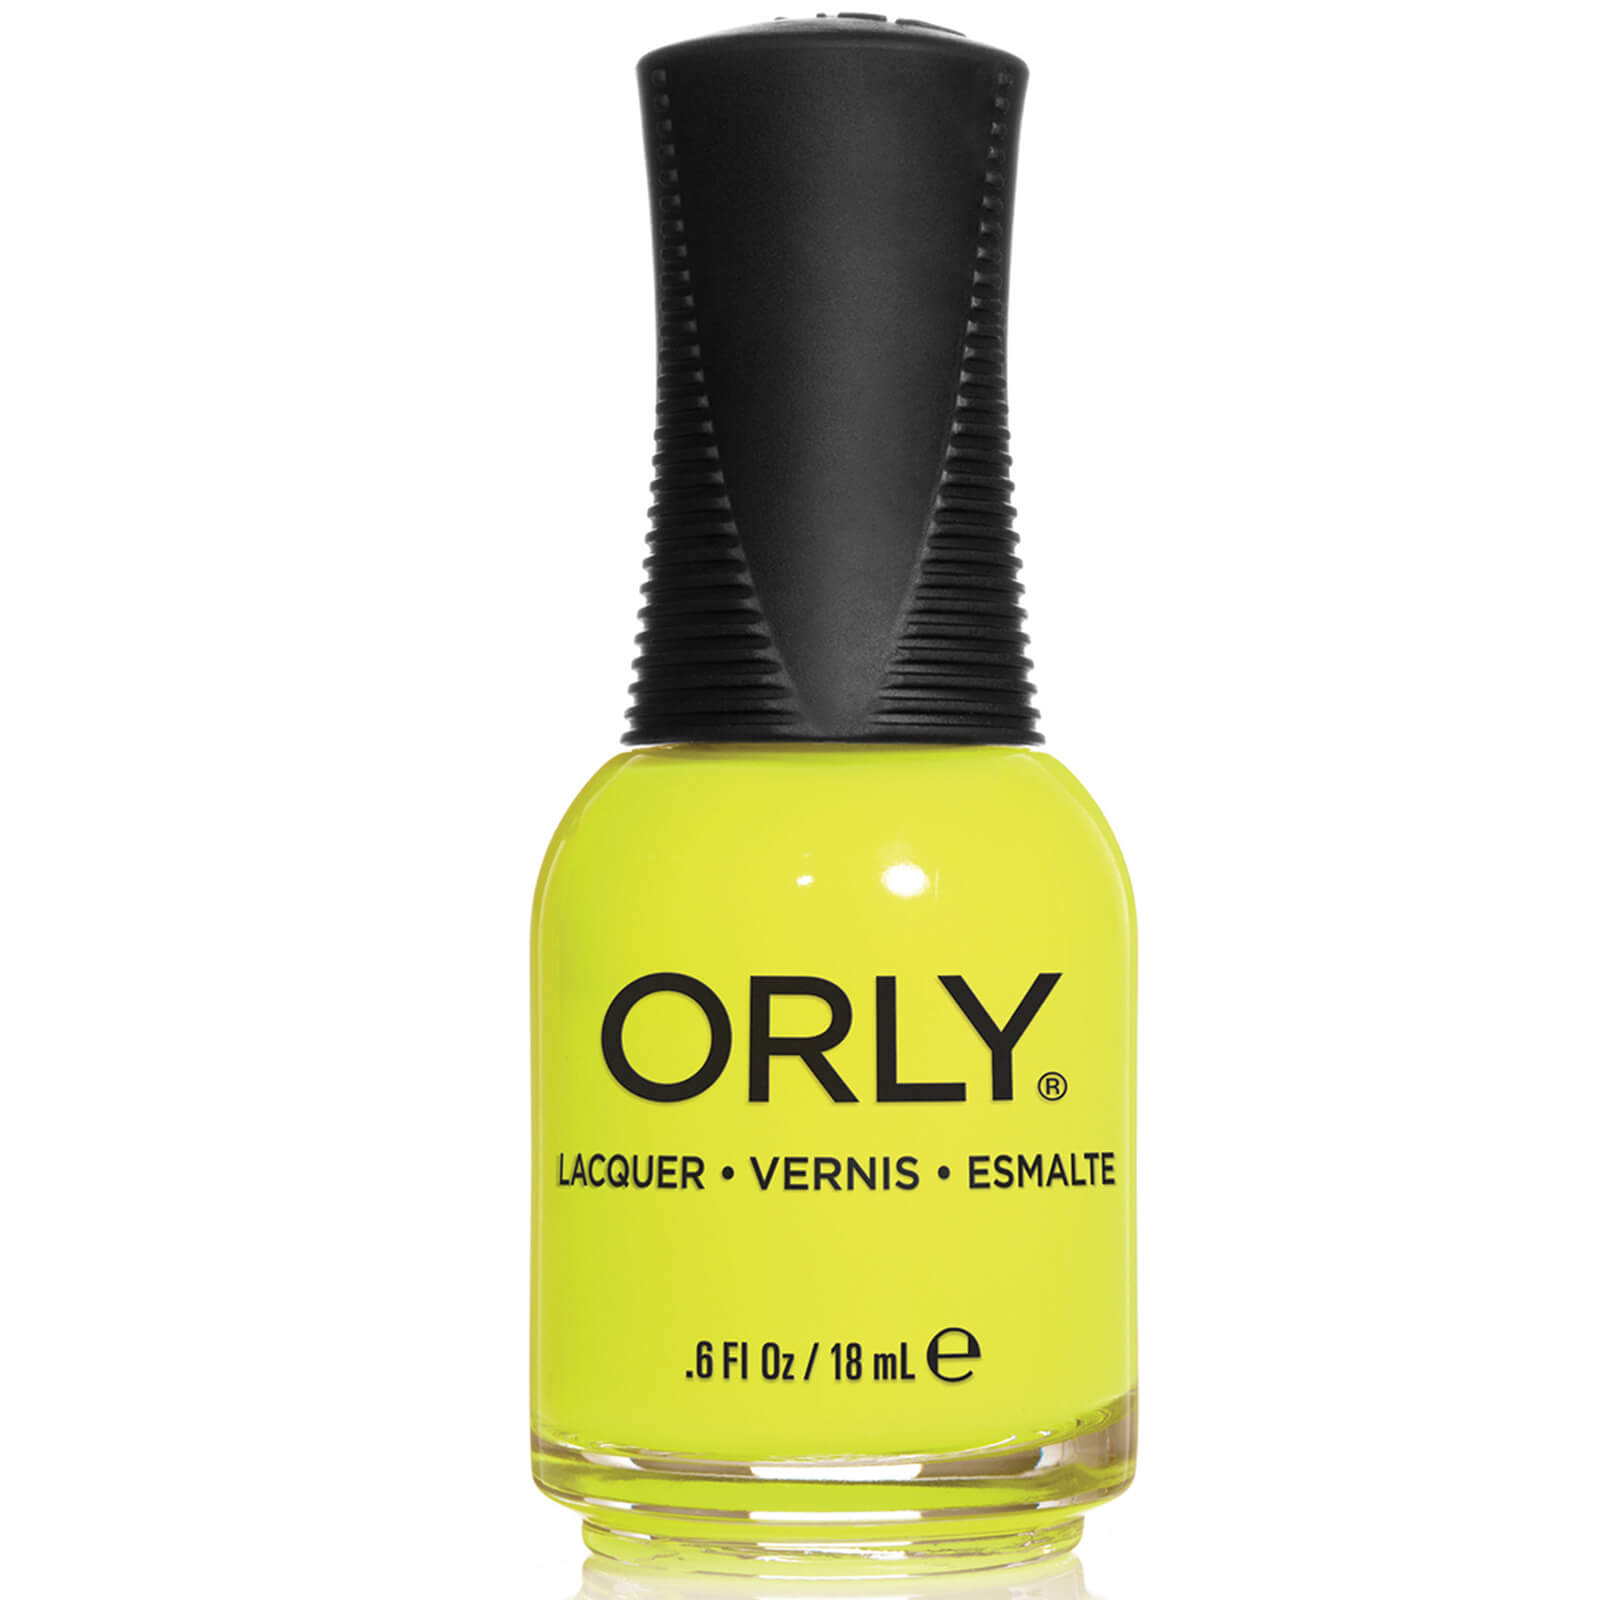 Orly Nail Lacquer 18ml (Various Shades) - Glowstick